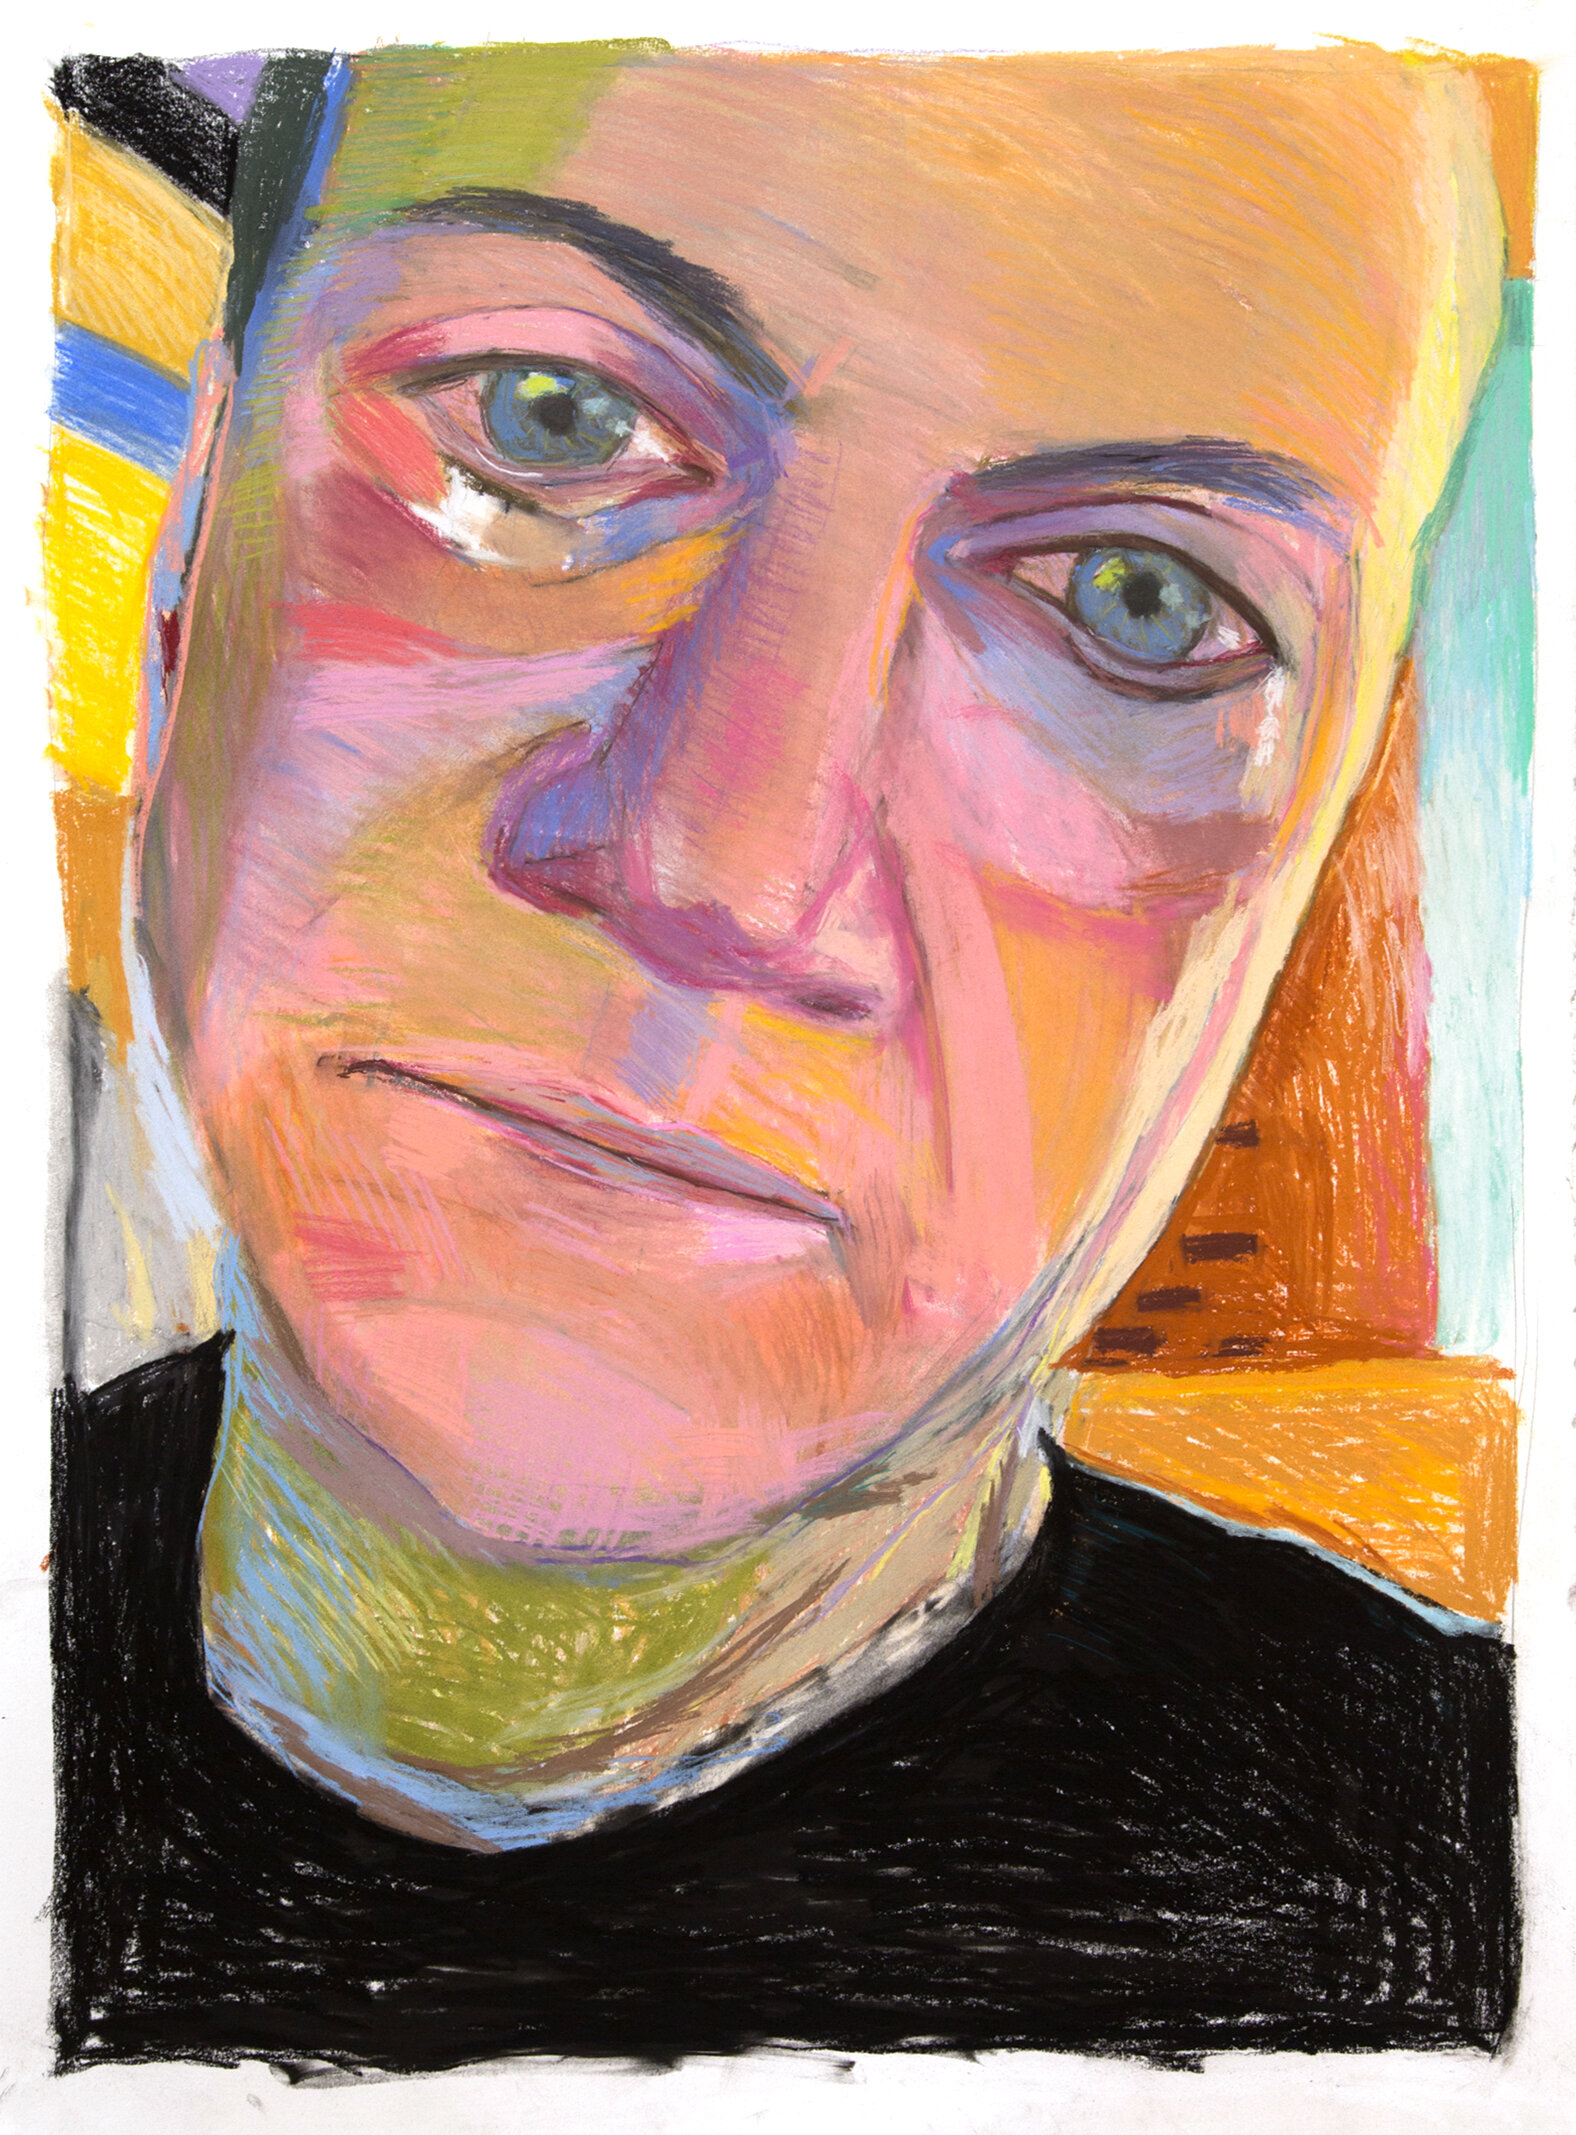  Selfie Crying, 2016-2019 Chalk pastel on cotton rag paper, 30 x 22 inches Based on an image of the artist’s face, Selfie Crying imagines a wide-eyed stunned sadness about the turn of events and change we are experiencing in our current world order. 